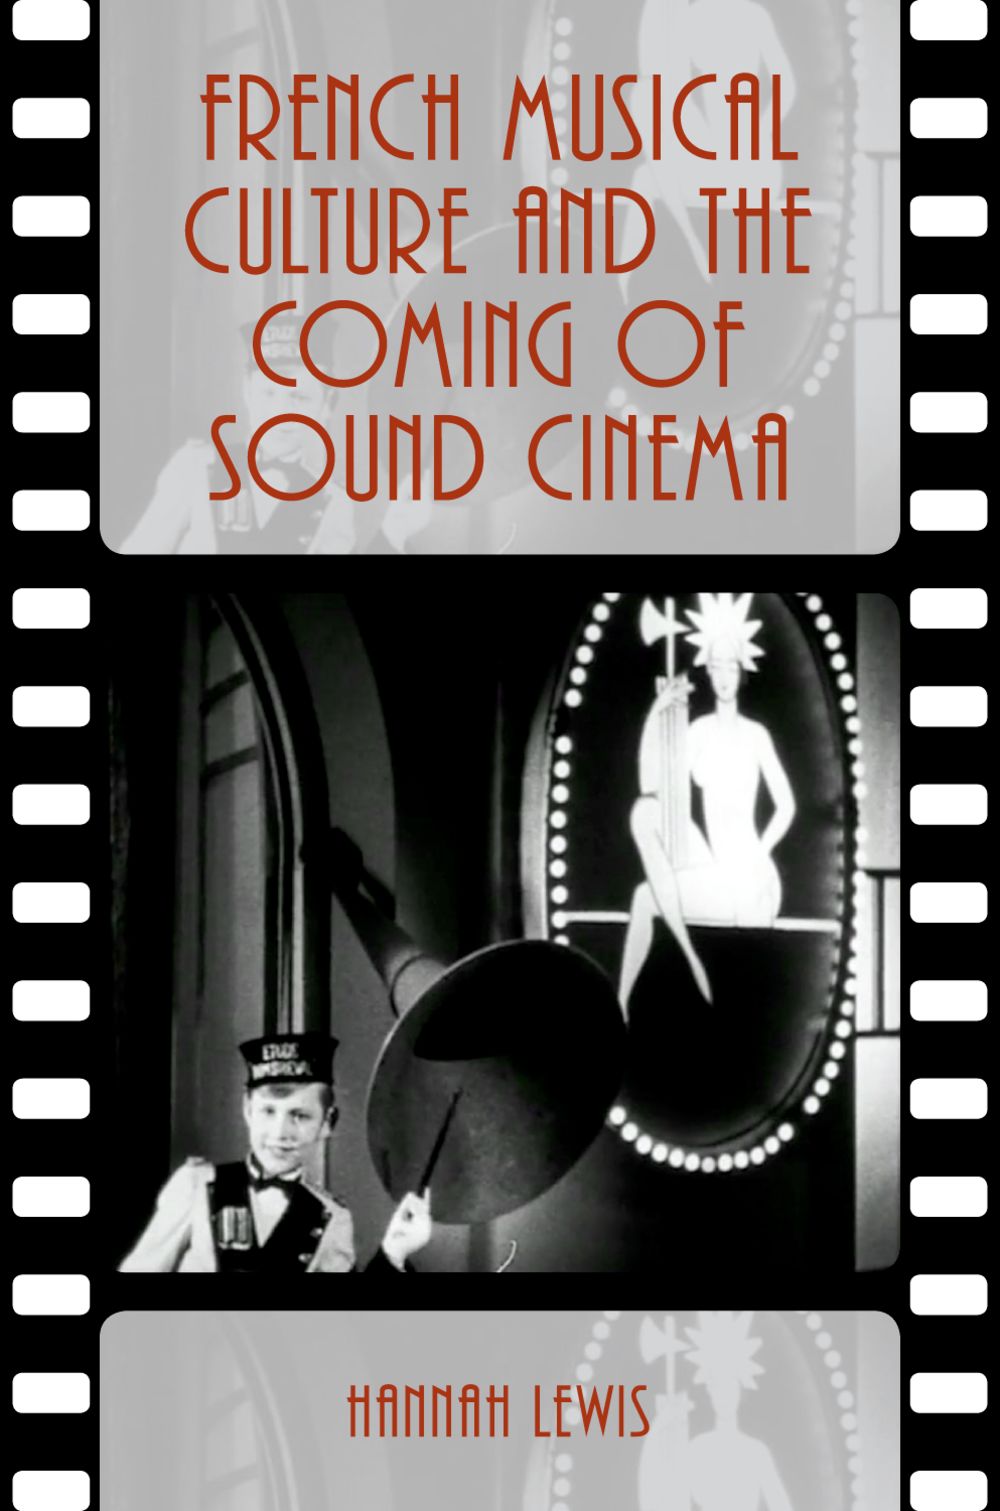 French Musical Culture & Coming Of Sound Cinema Hb Sheet Music Songbook